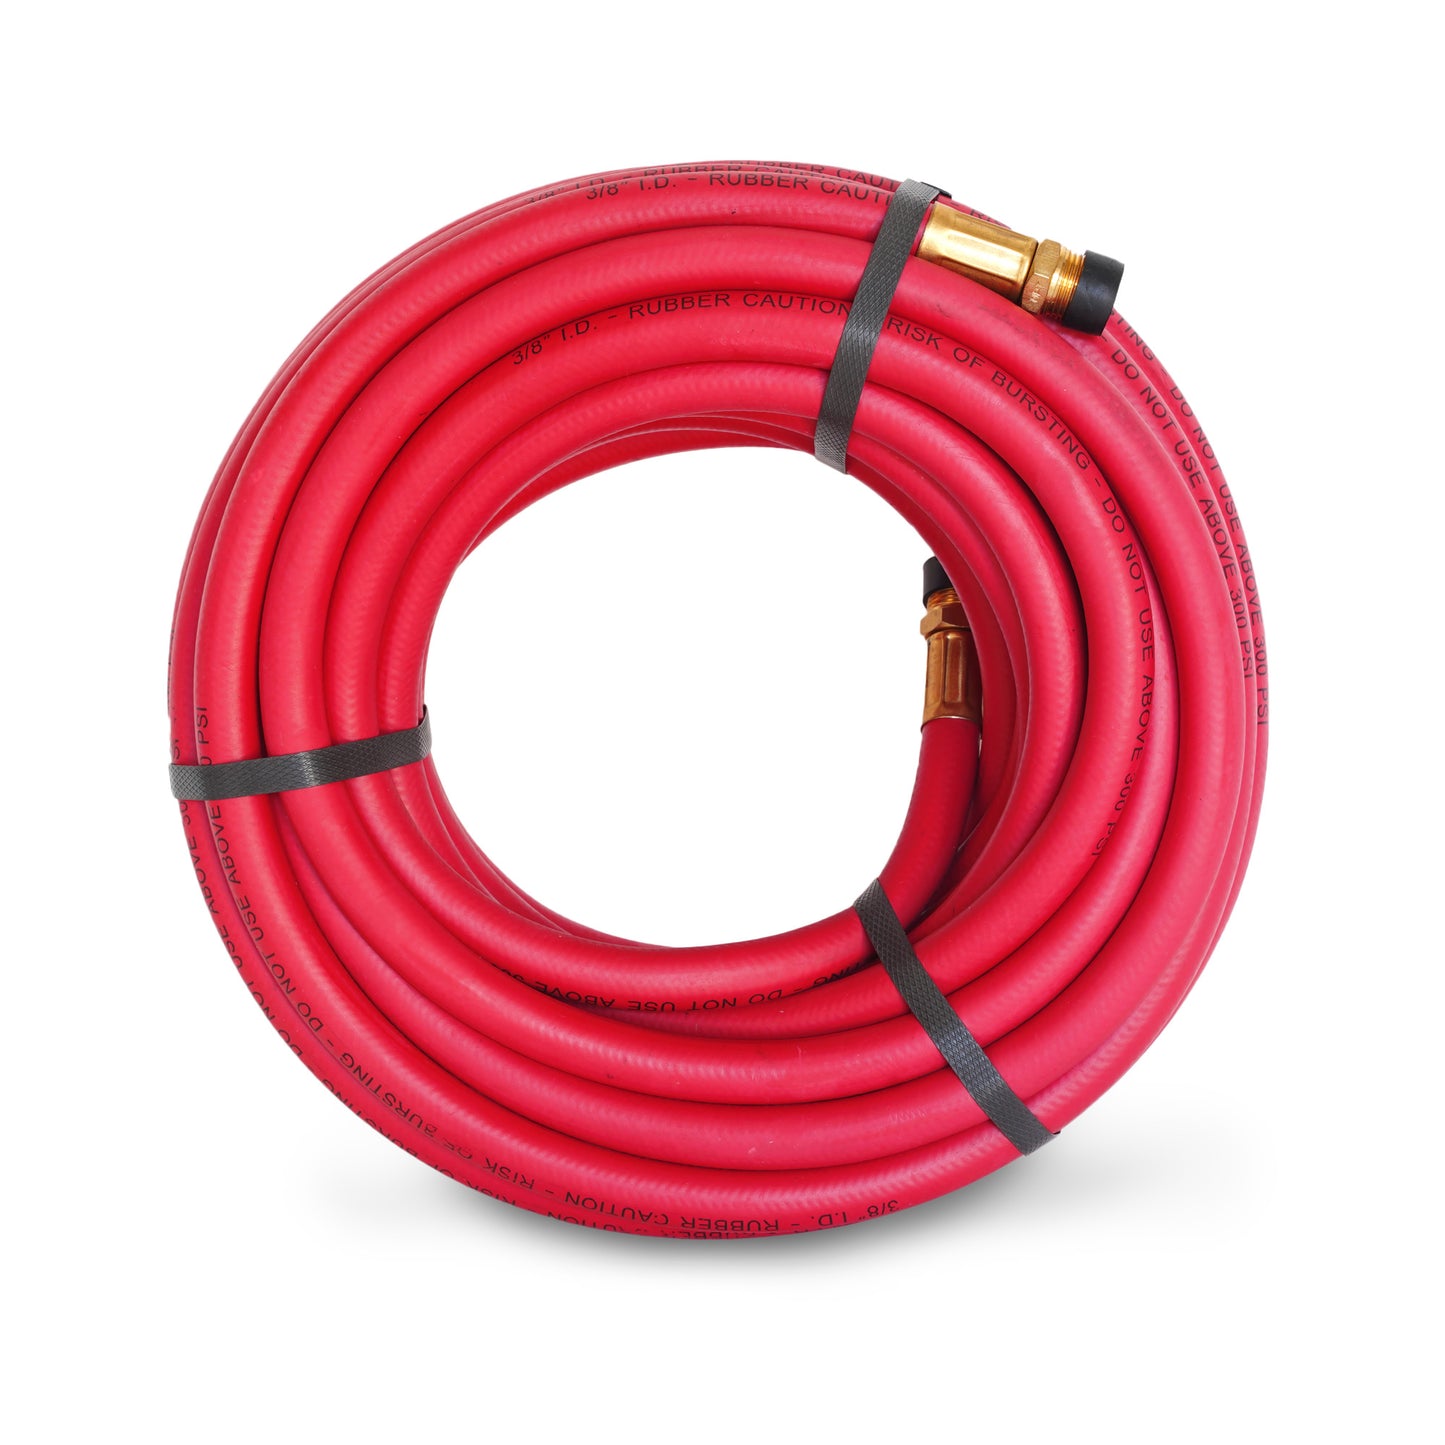 50-Foot x 3/8-Inch ID Rubber Air Hose for Pneumatic Tools